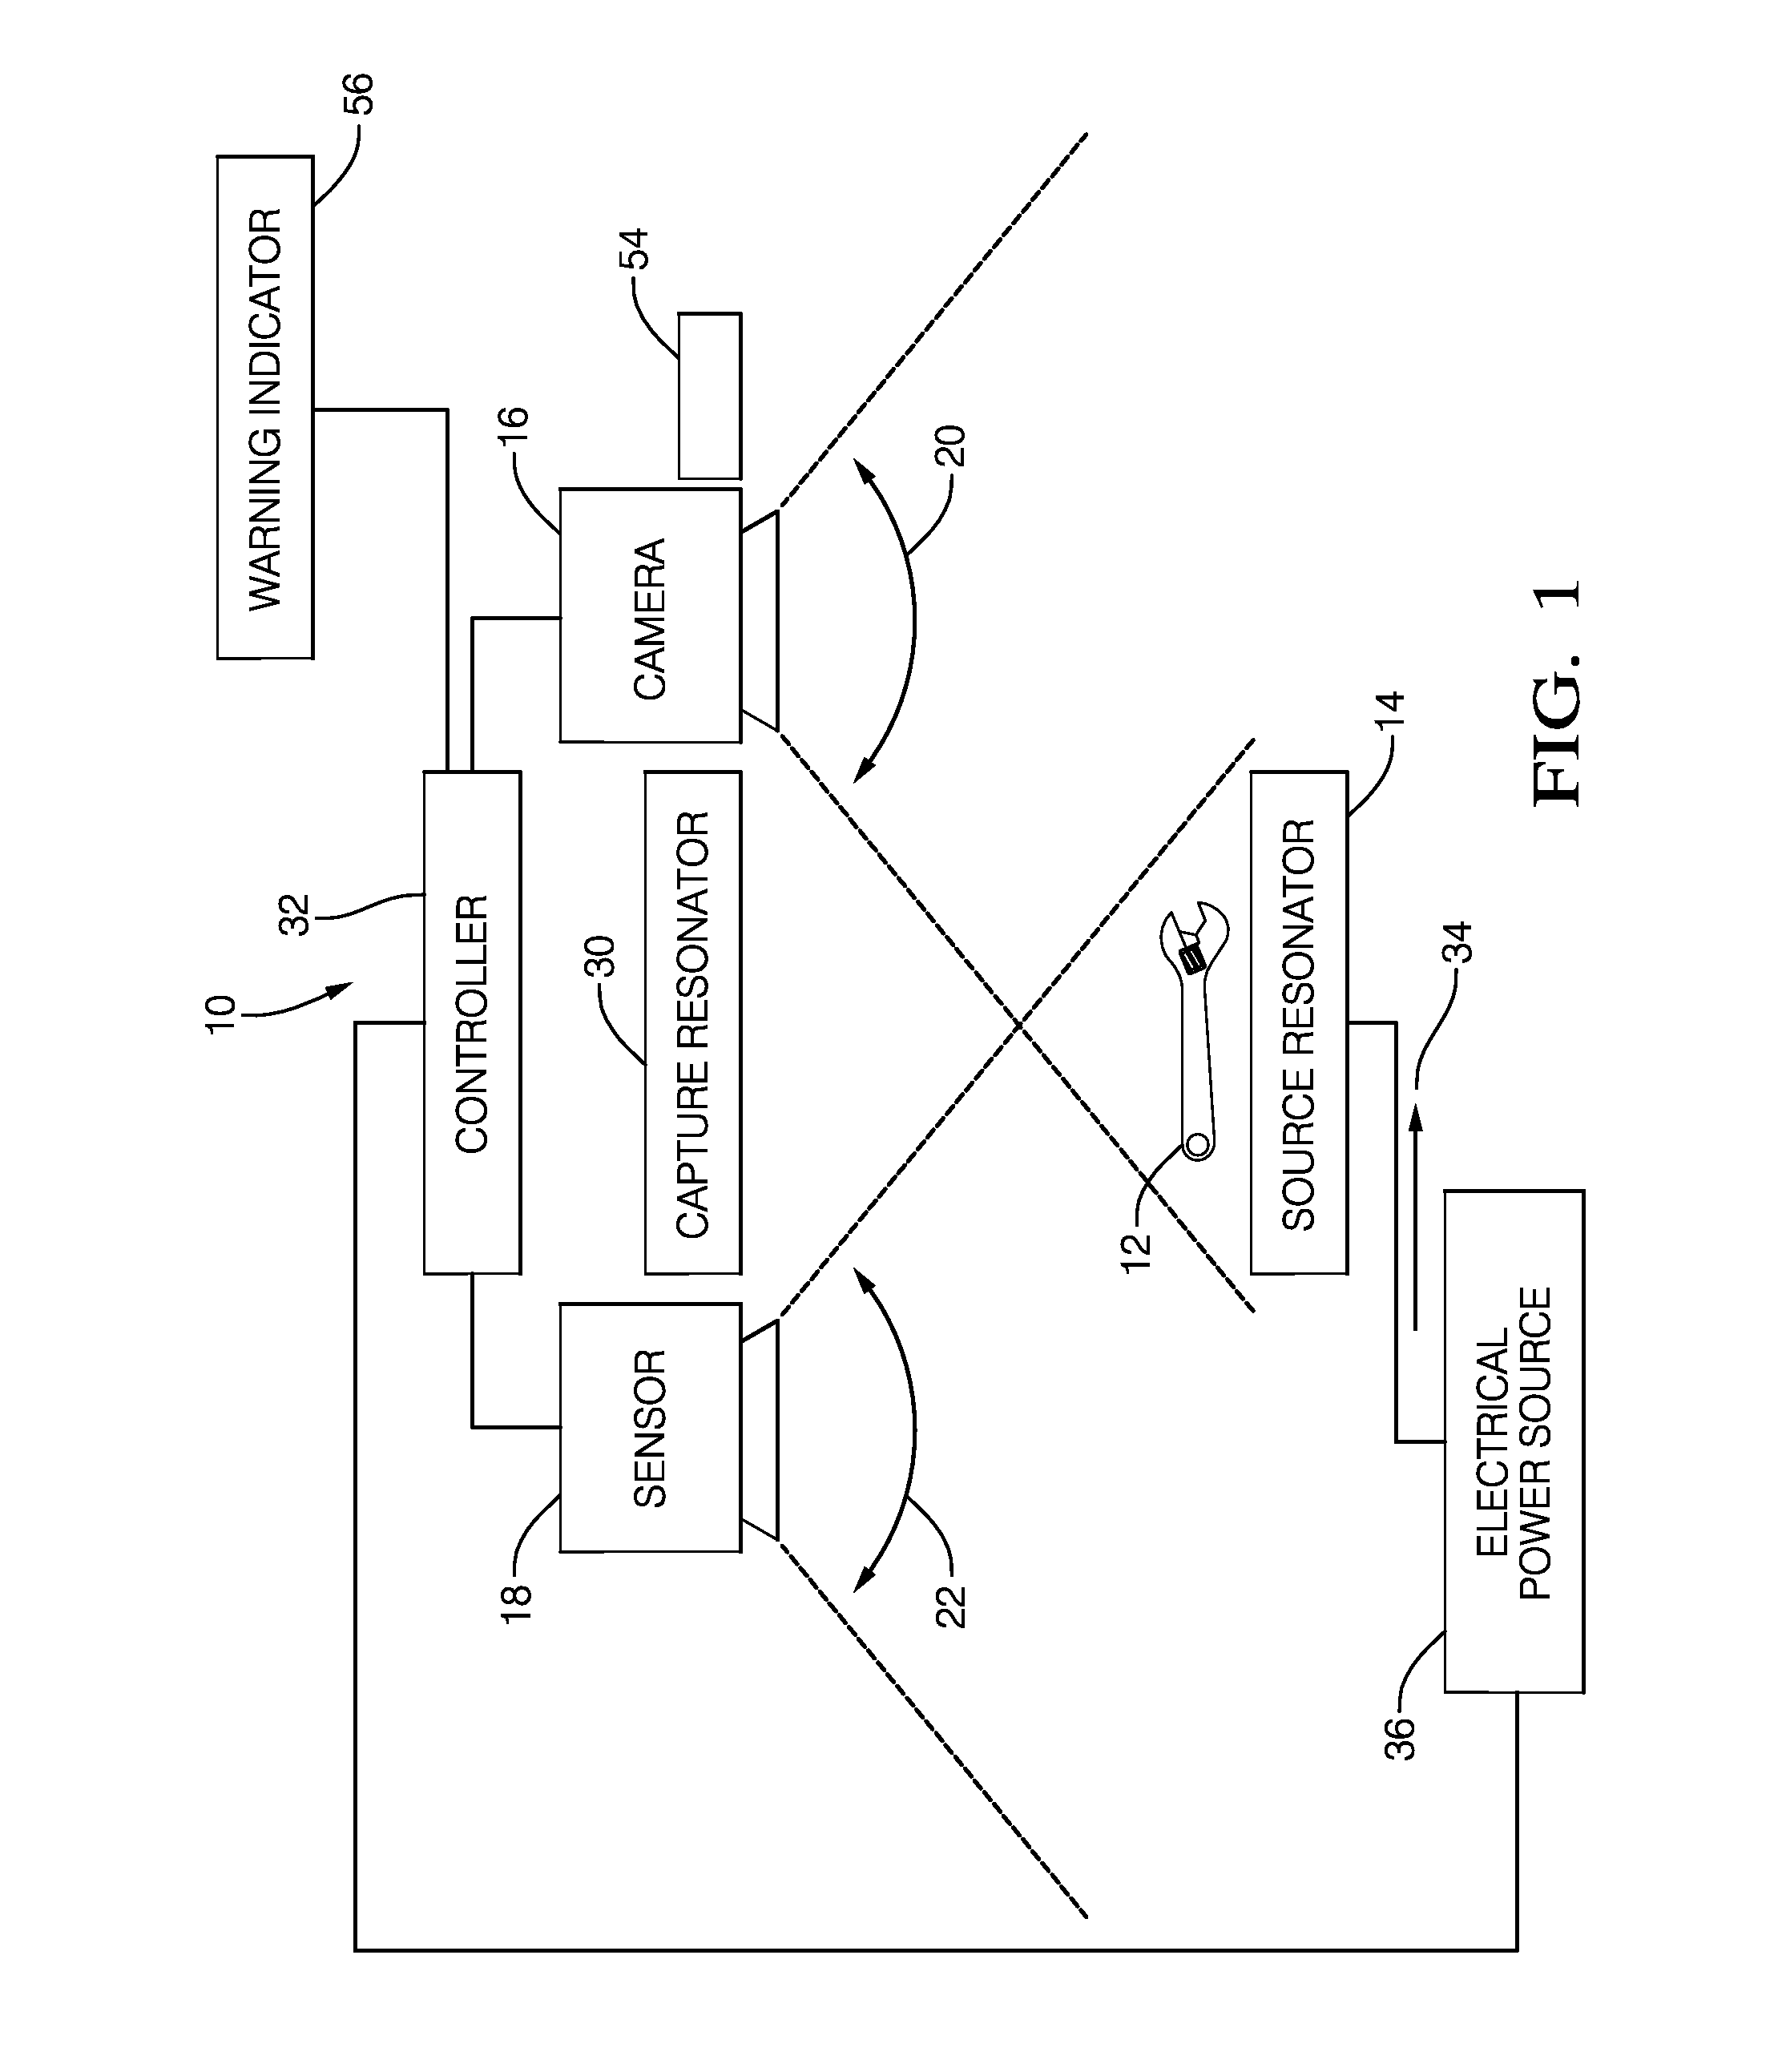 Foreign object detection system and method suitable for source resonator of wireless energy transfer system